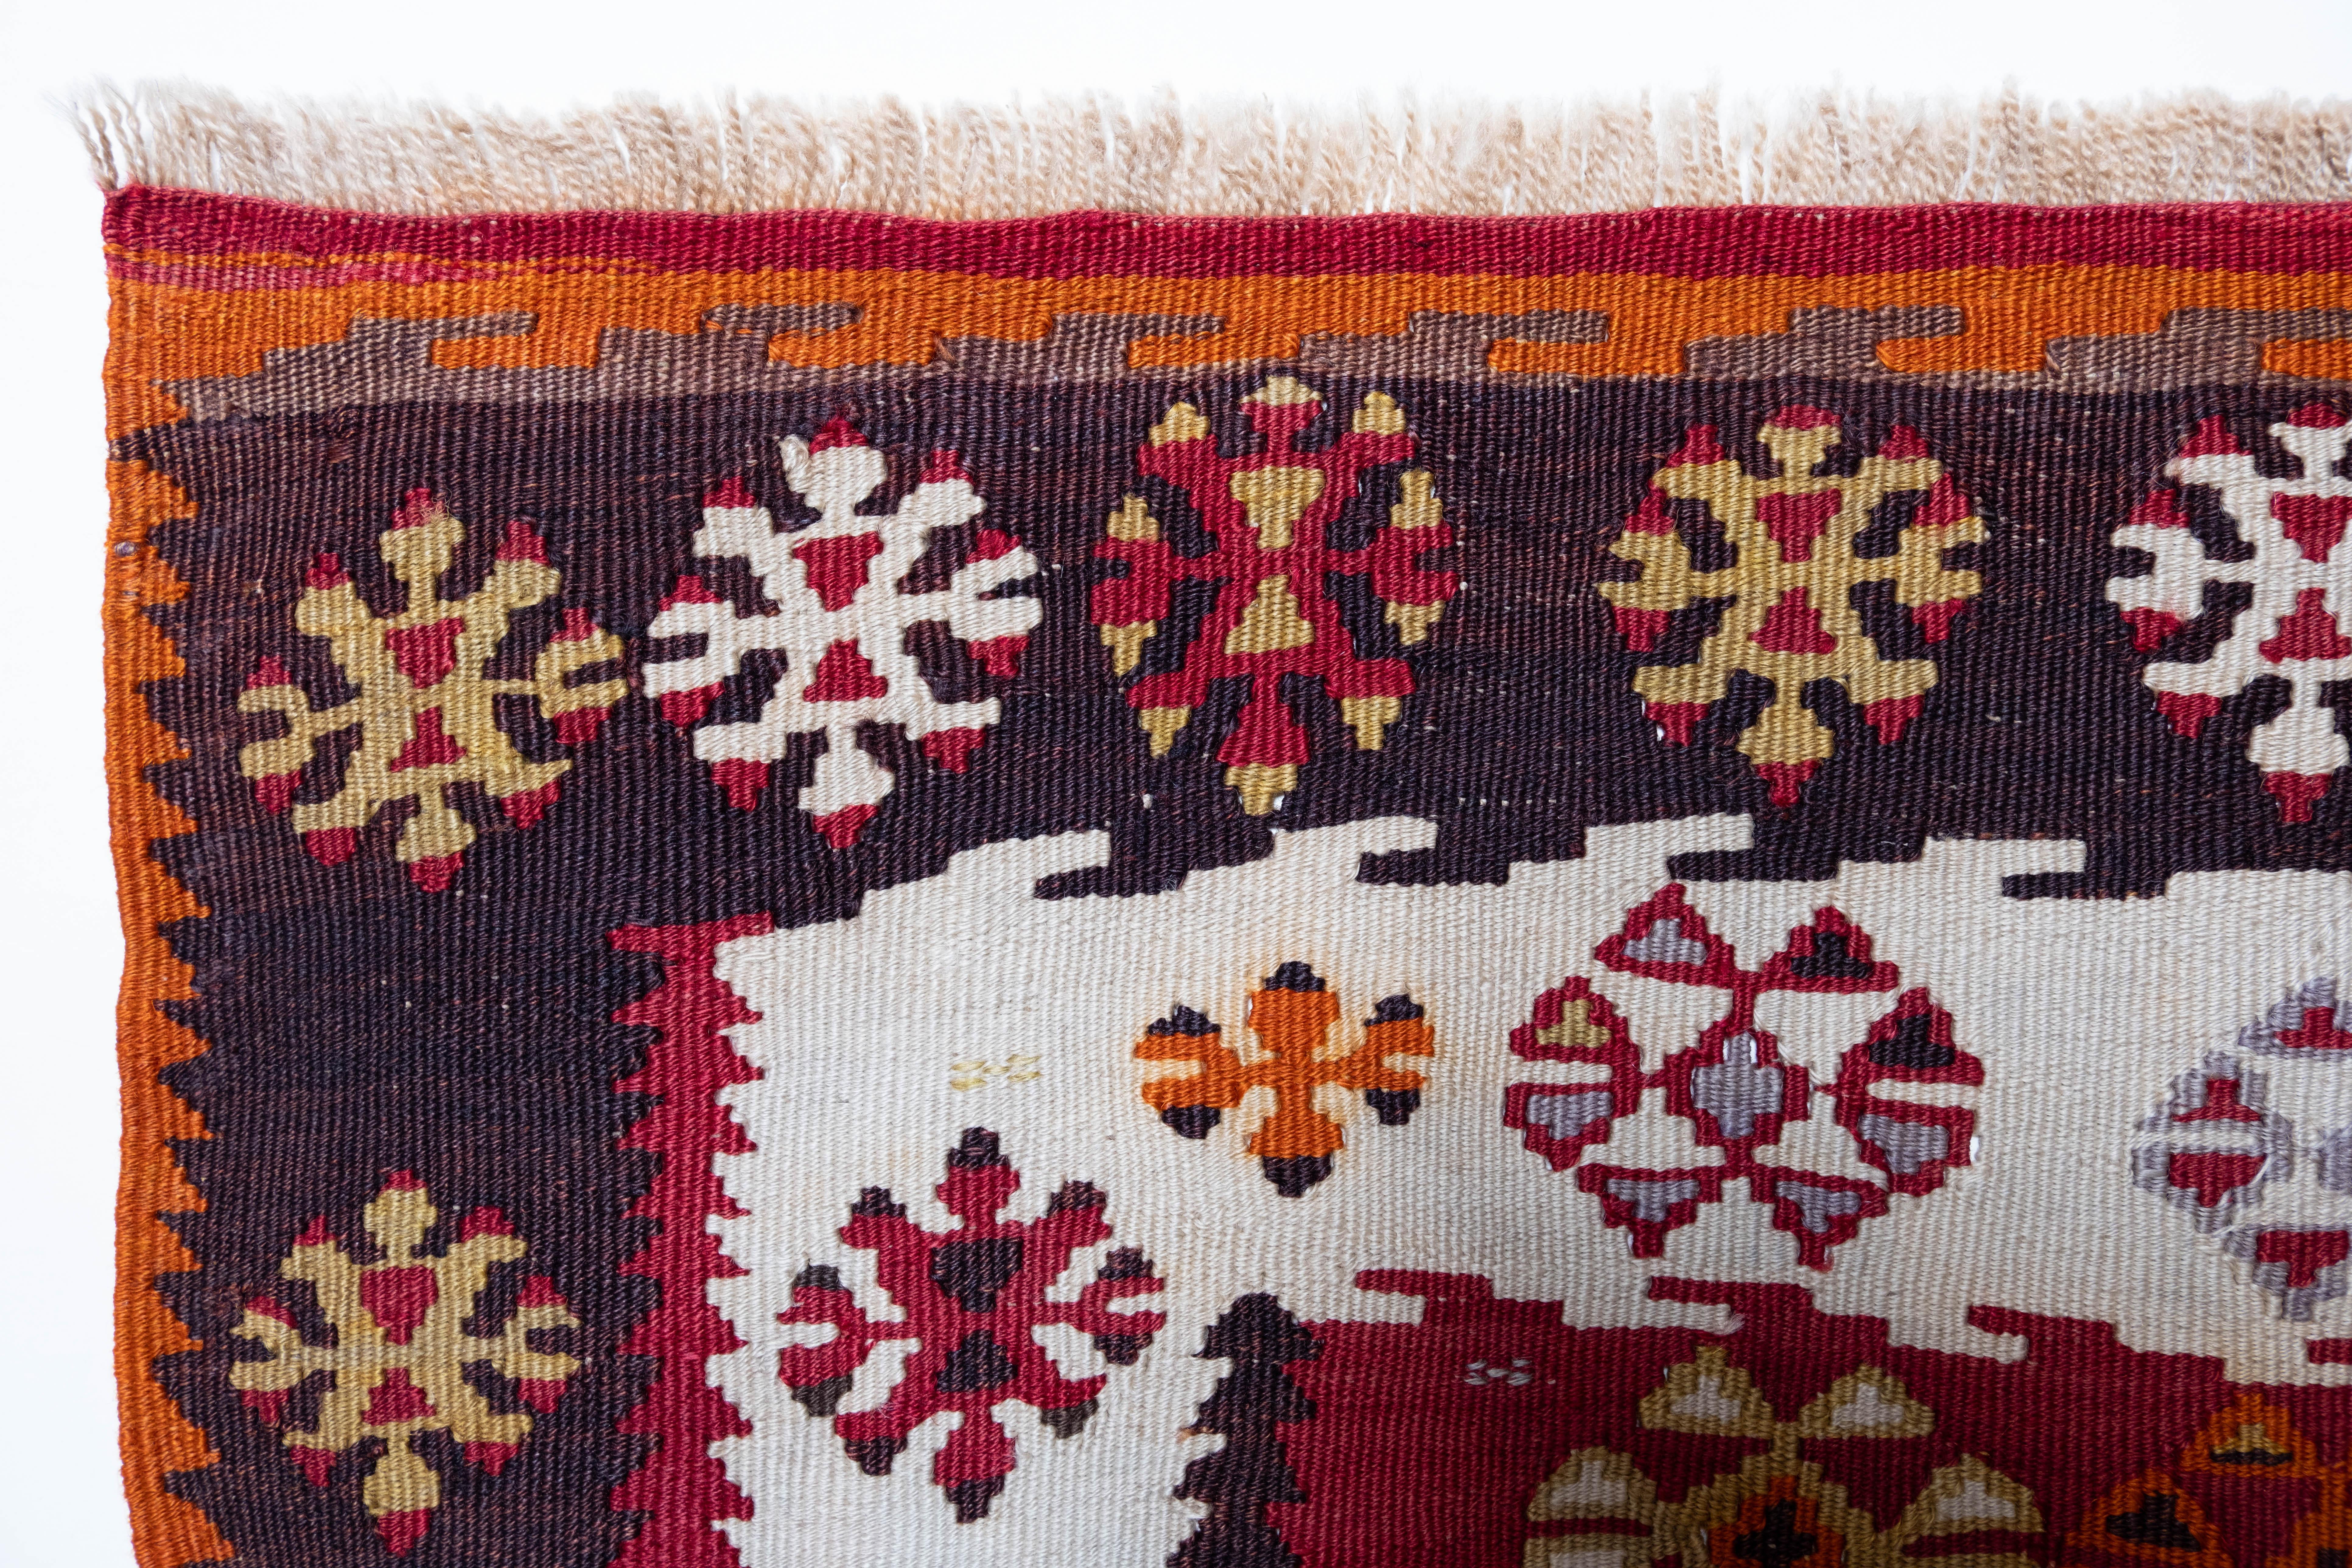 This is Central Anatolian Antique Kilim from the Sivas region with a rare and beautiful color composition.

Sivas In the third century, Sivas was a Roman city known as Sebastea, the capital of Armenia Minor. Flourishing under Byzantine rule, Sivas